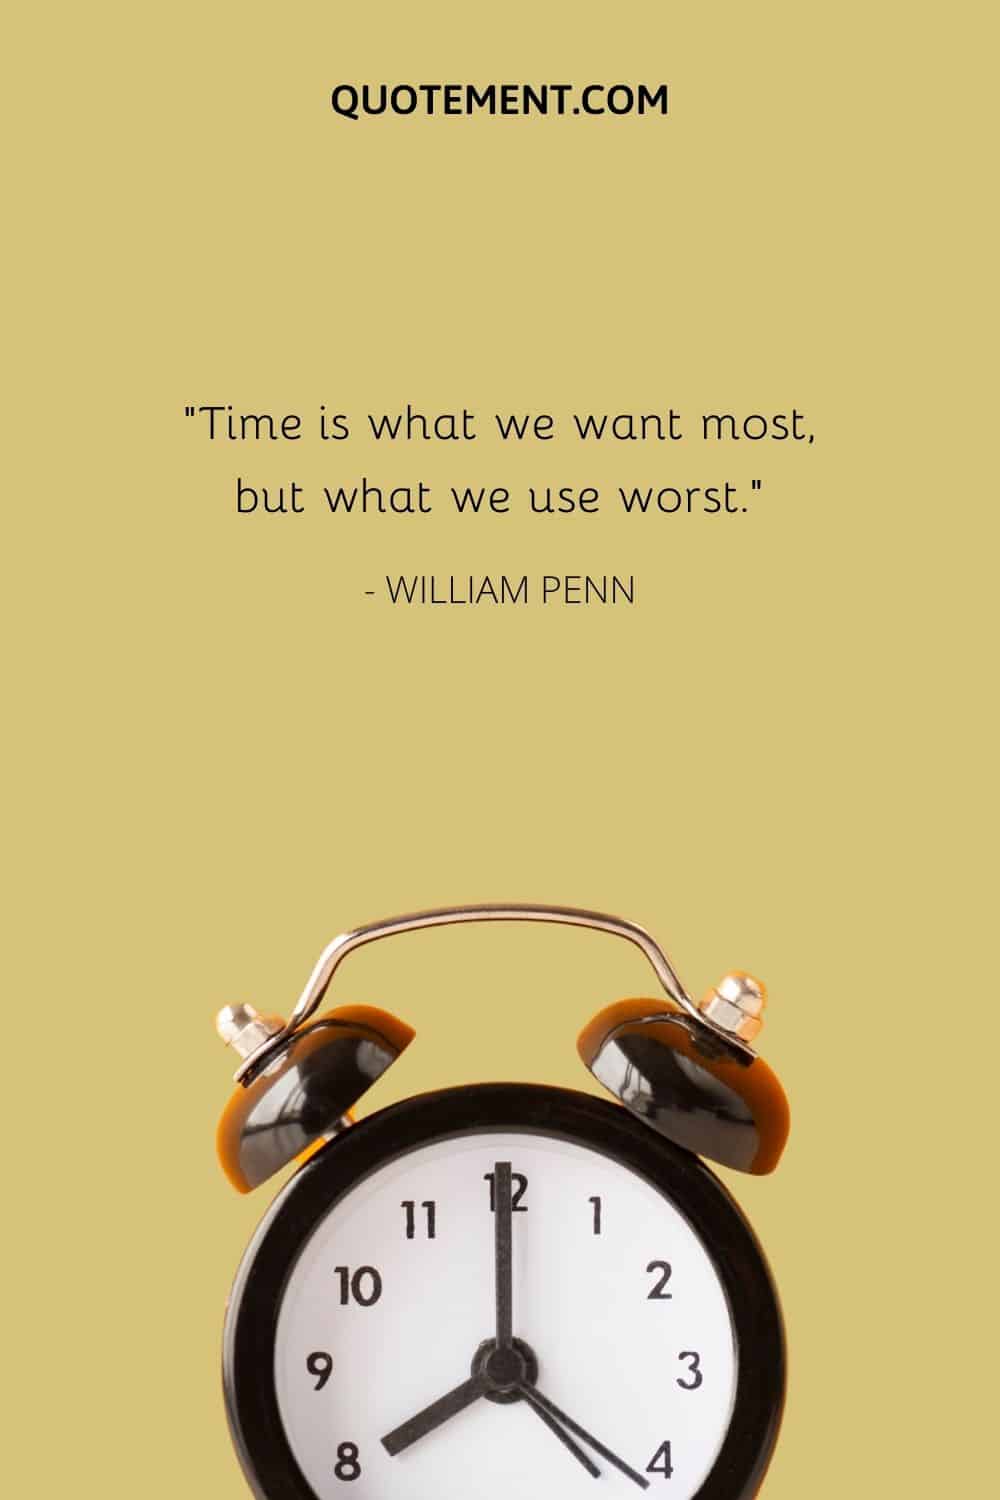 Time is what we want most, but what we use worst